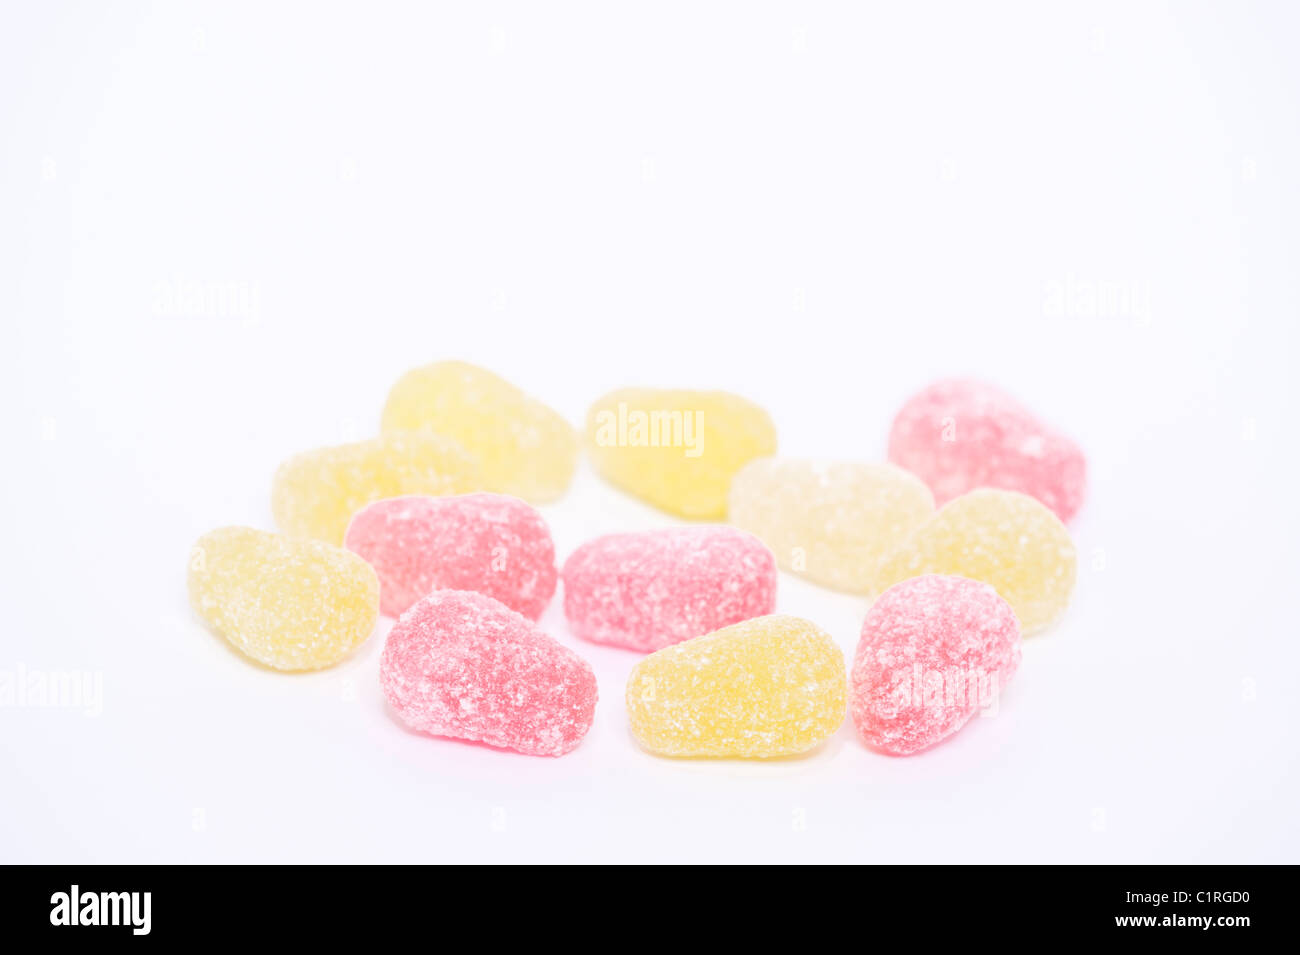 A selection of Pear Drops sweets on a white background Stock Photo